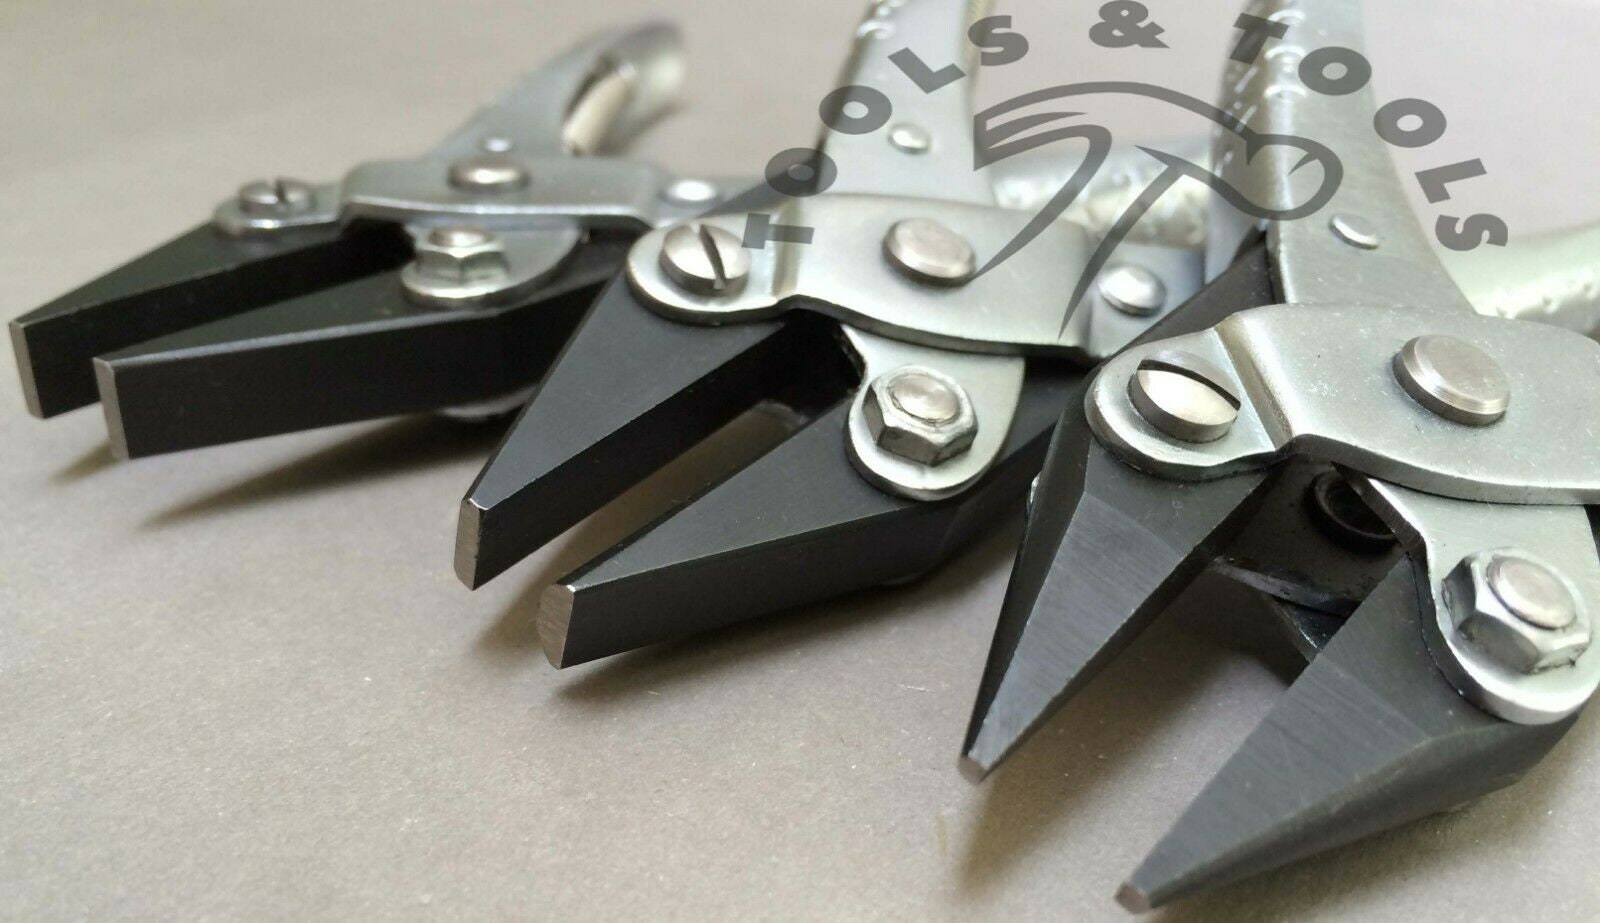 5-1/2 Parallel-action Pliers With Nylon Jaws Non-marring Jewelry